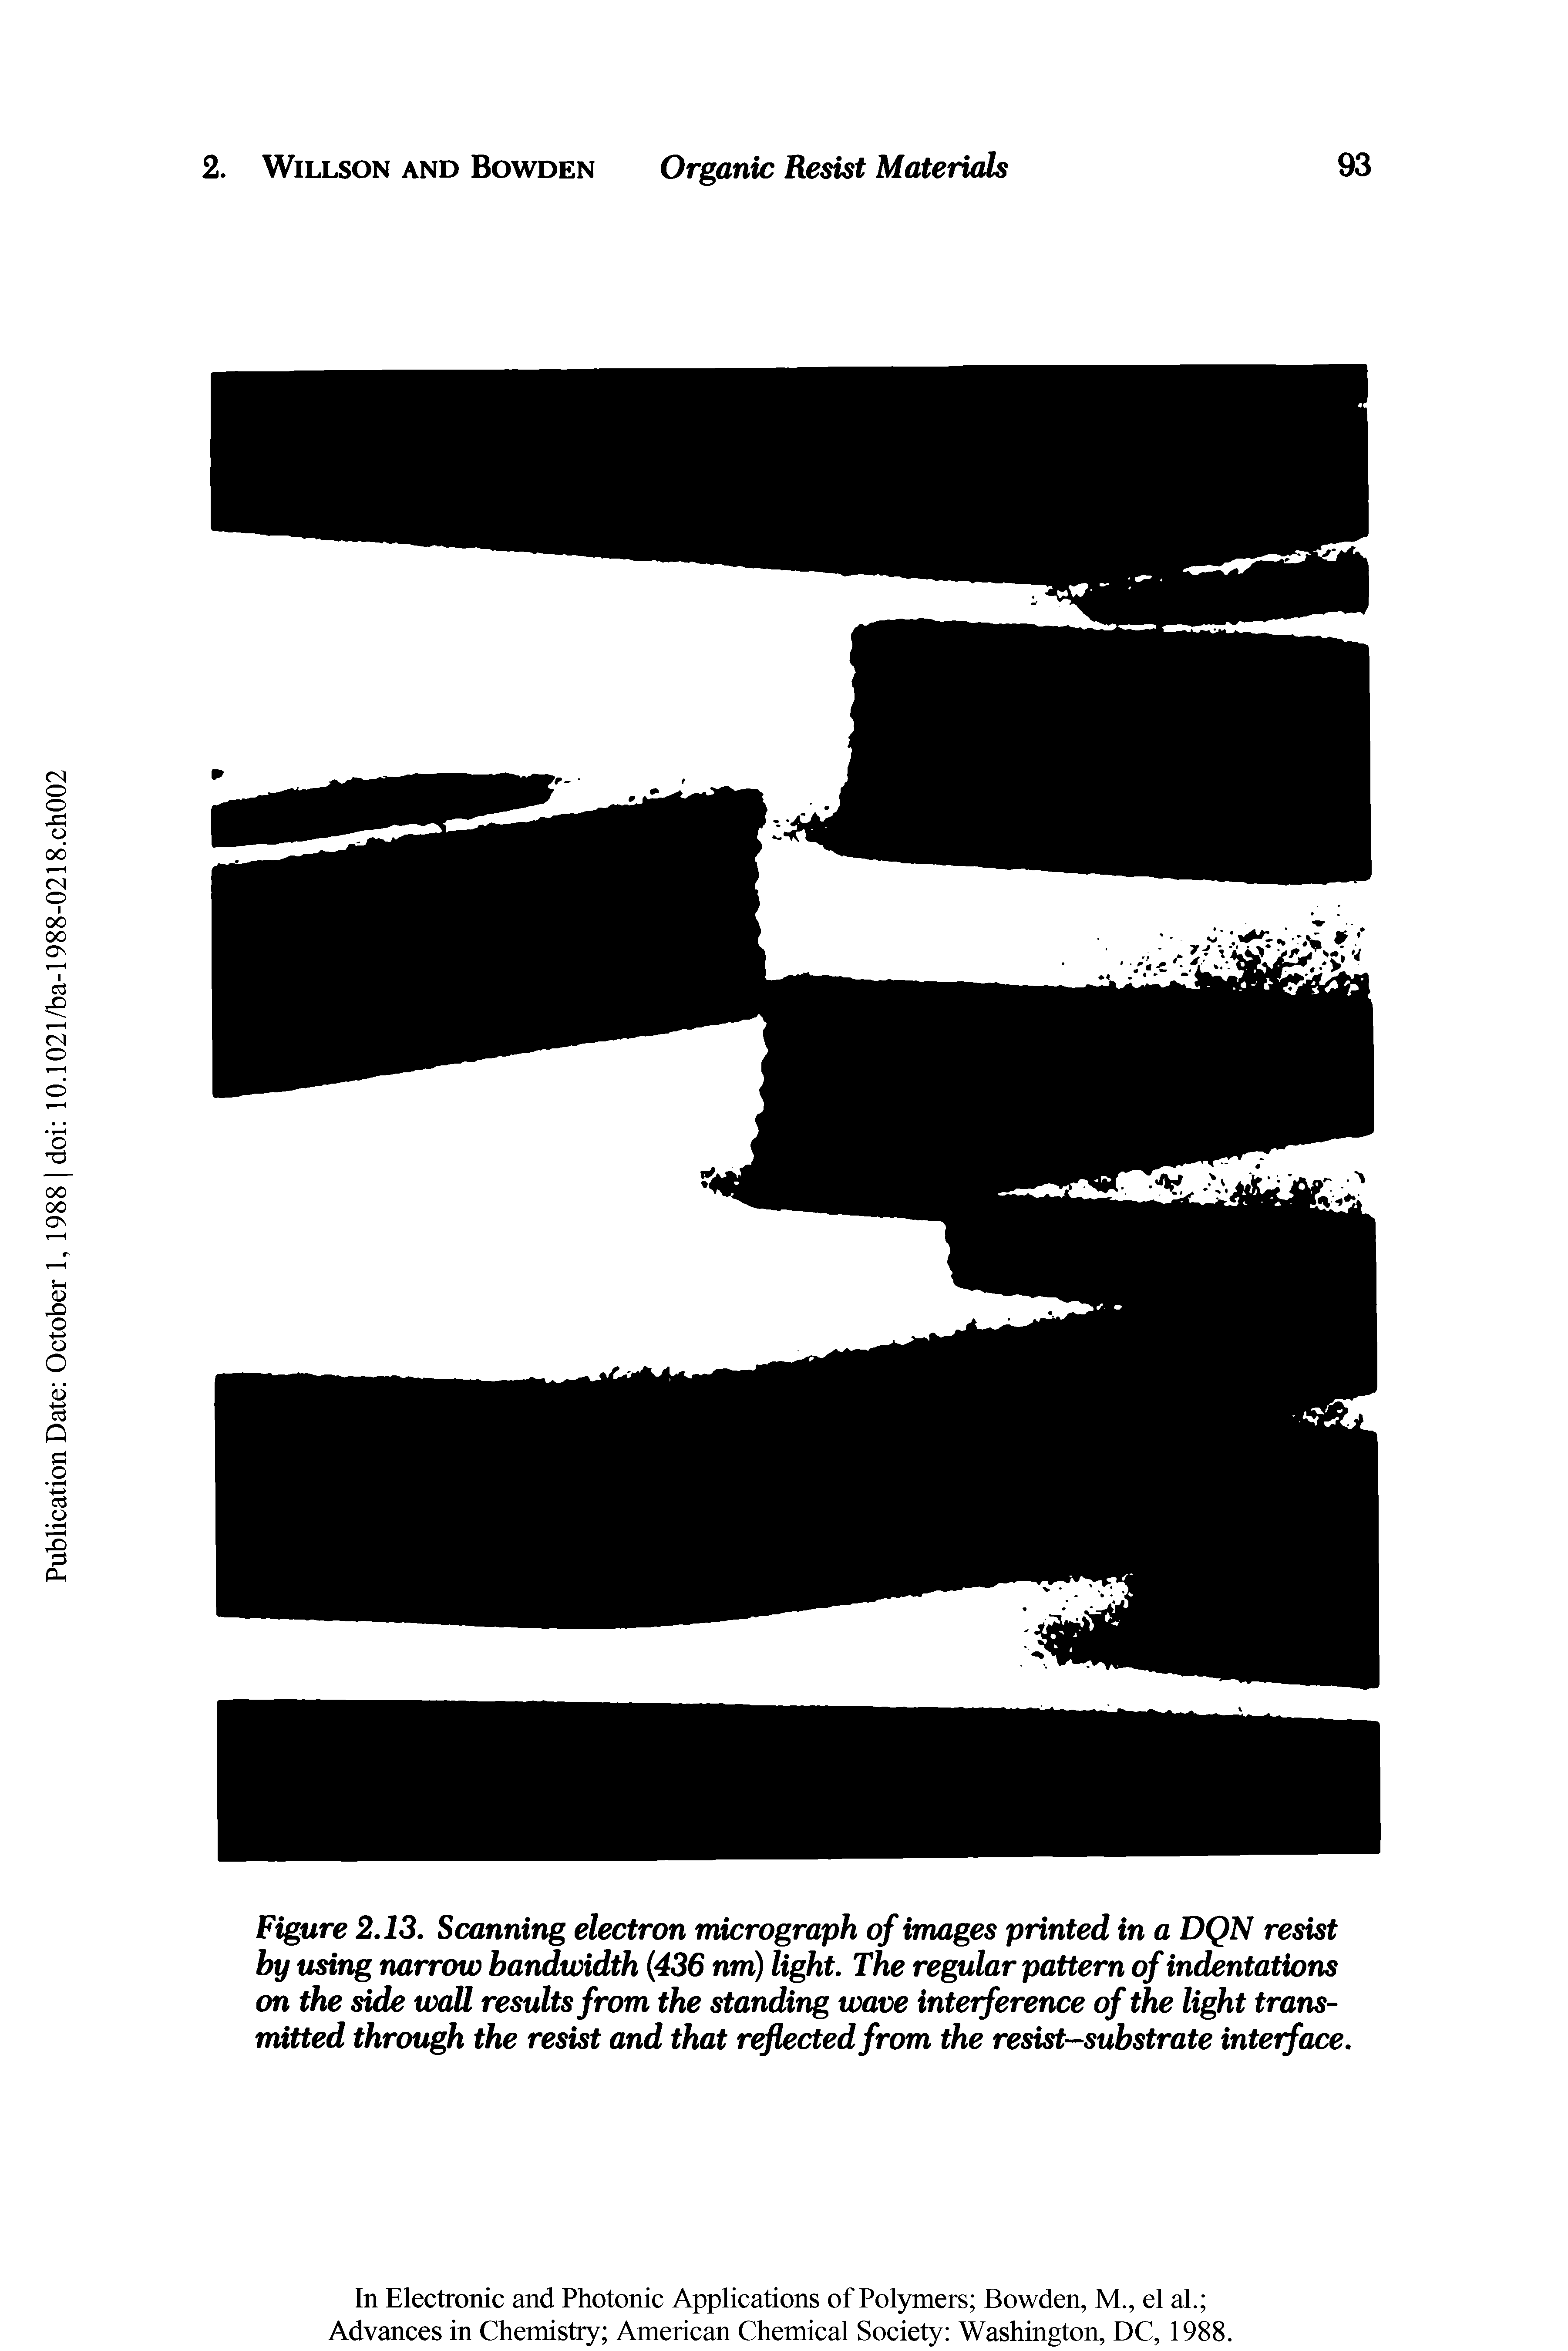 Figure 2.13. Scanning electron micrograph of images printed in a DQN resist by using narrow bandwidth 436 nm) light. The regular pattern of indentations on the side wall results from the standing wave interference of the light transmitted through the resist and that reflected from the resist-substrate interface.